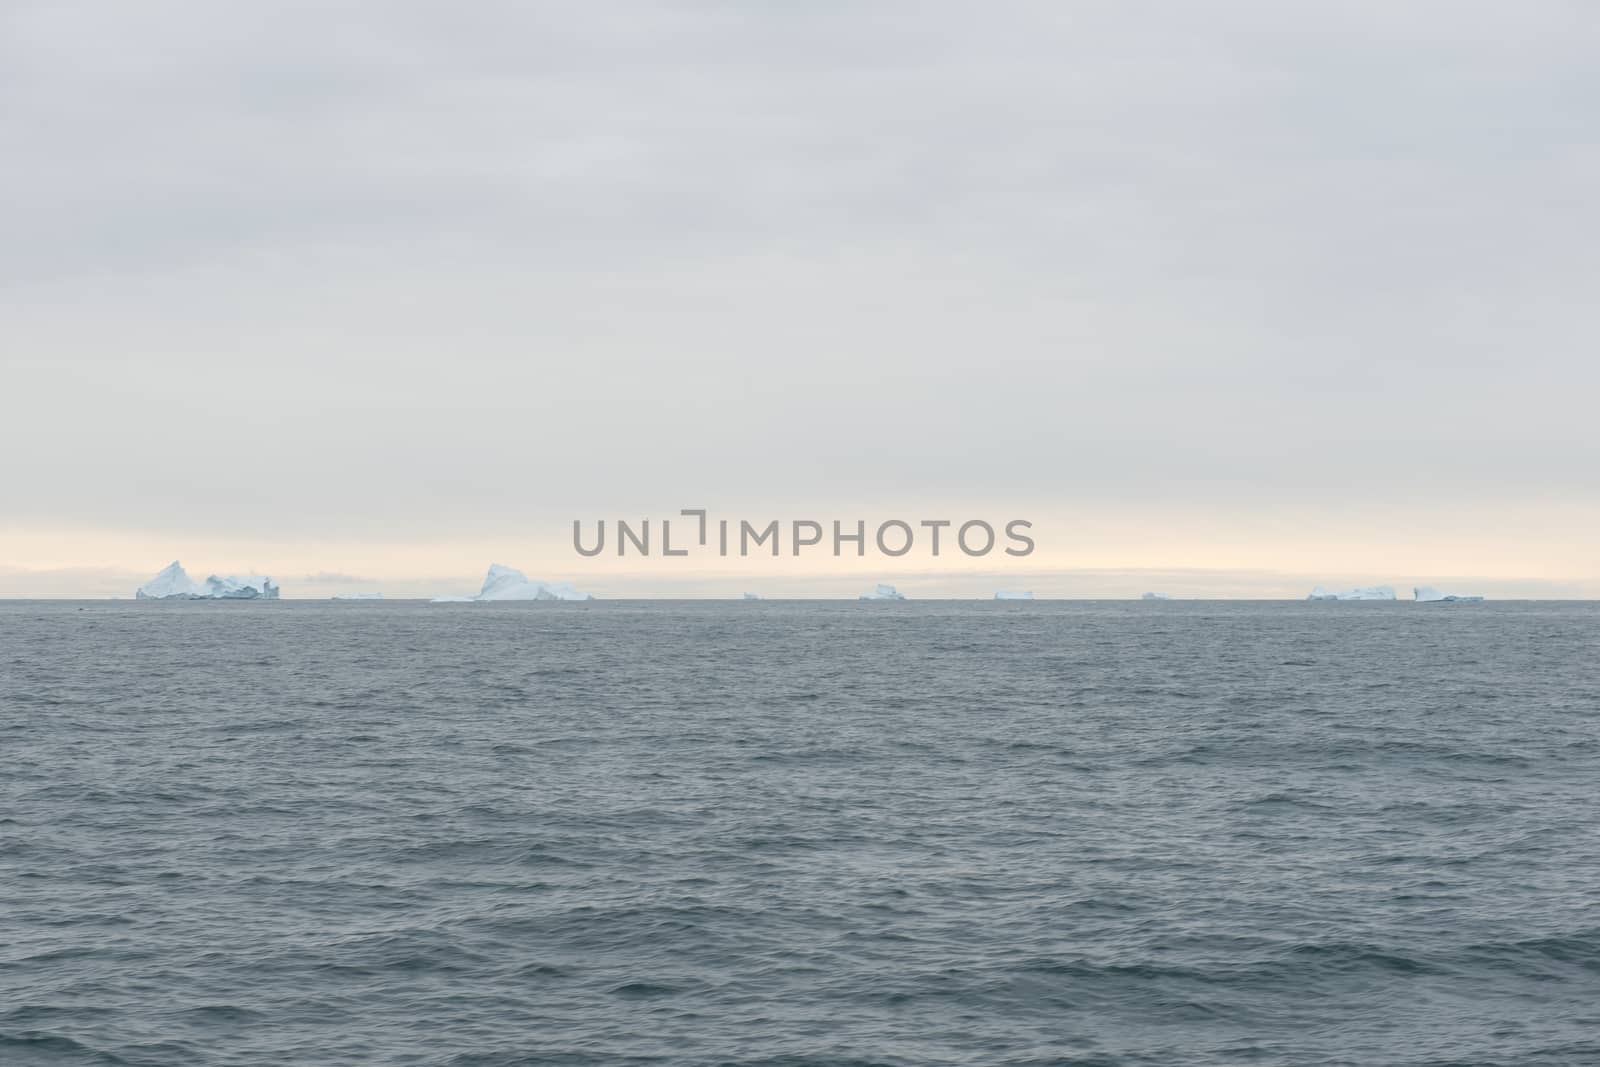 Seascape with icebergs by Arrxxx